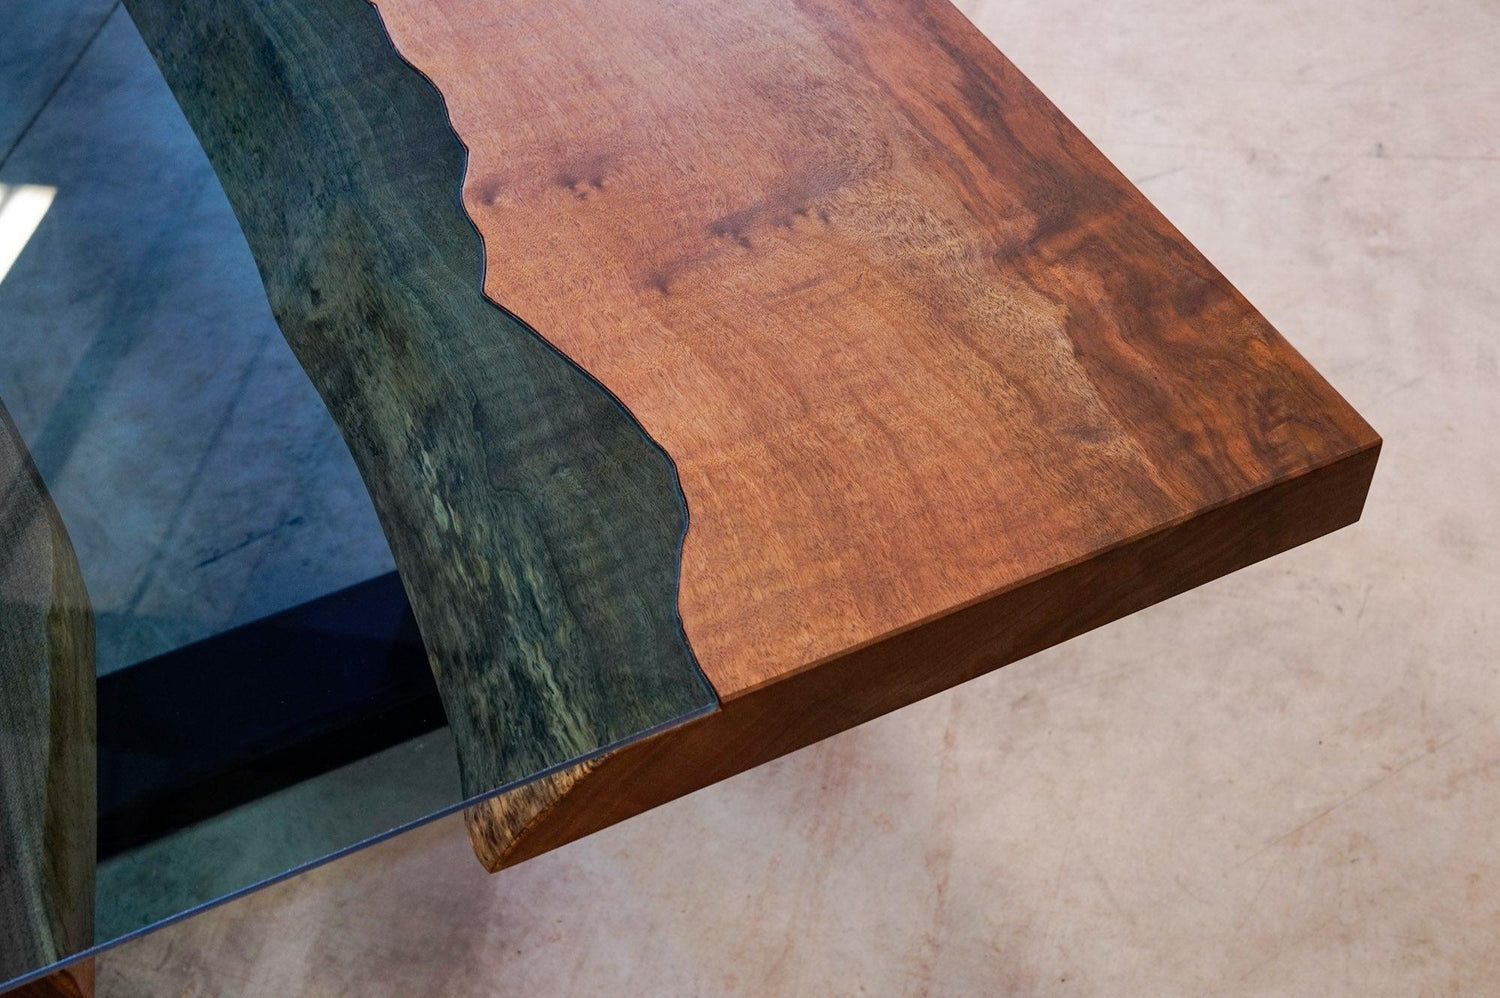 The corner of a tempered glass river table, viewing the seam between the glass and wood.